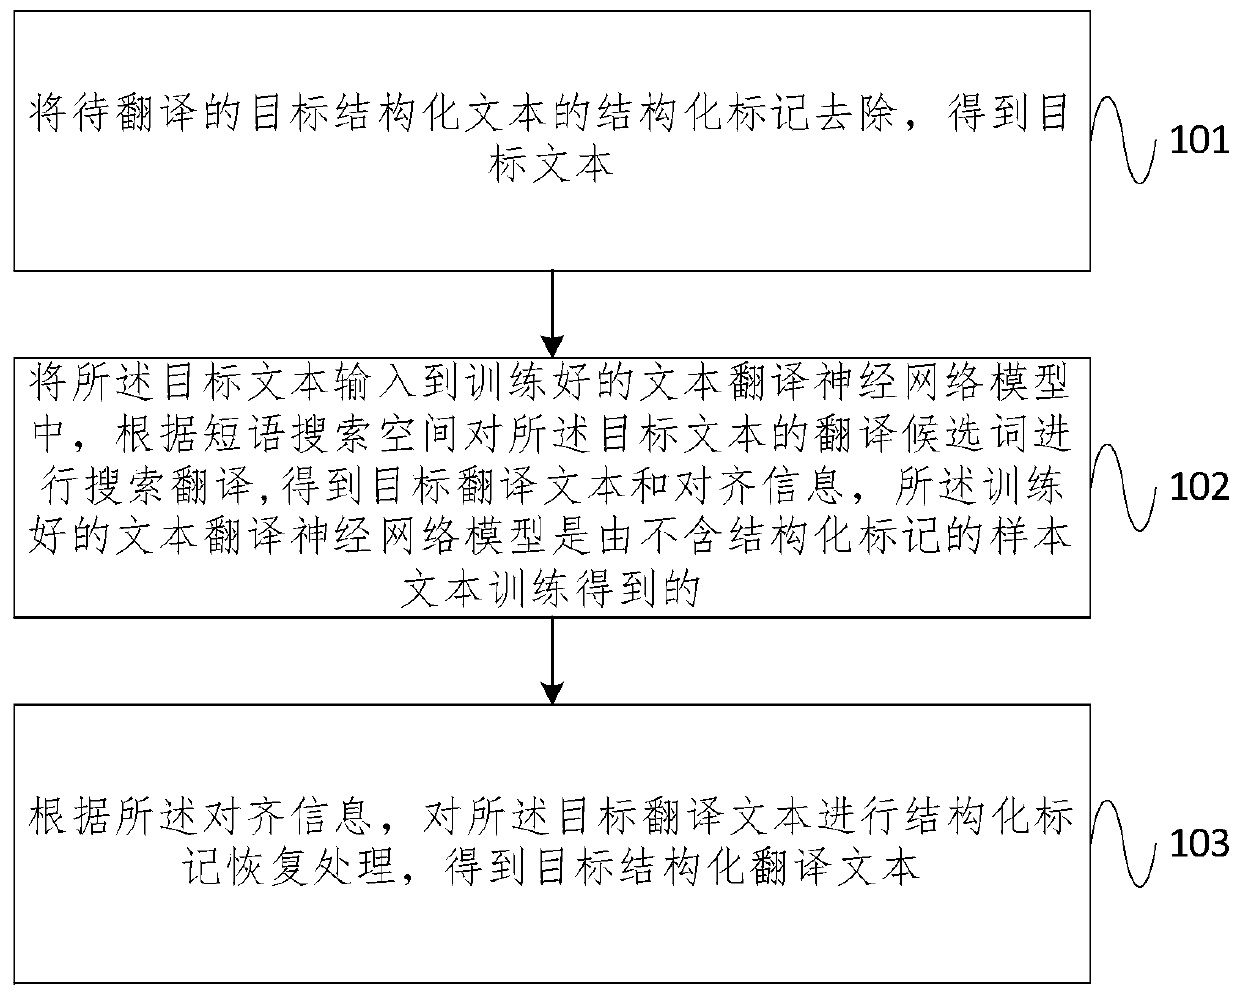 Structured text translation method and device